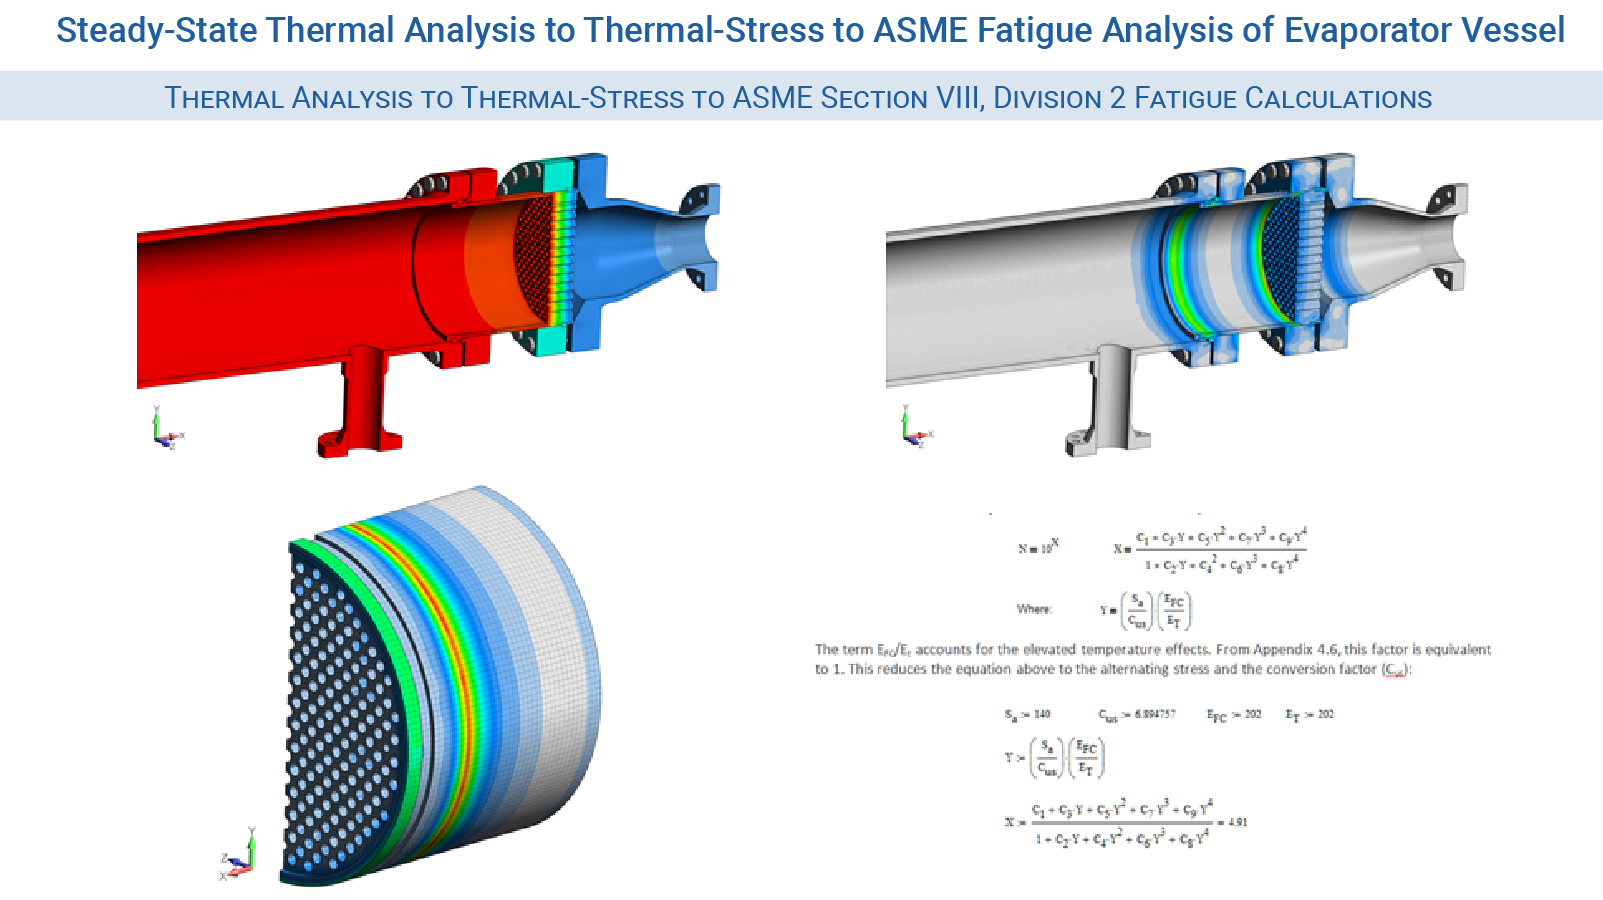 FEA Pressure Vessel Consultants - Steady-State Thermal Analysis to Thermal-Stress to ASME Fatigue Analysis of Evaporator Vessel  